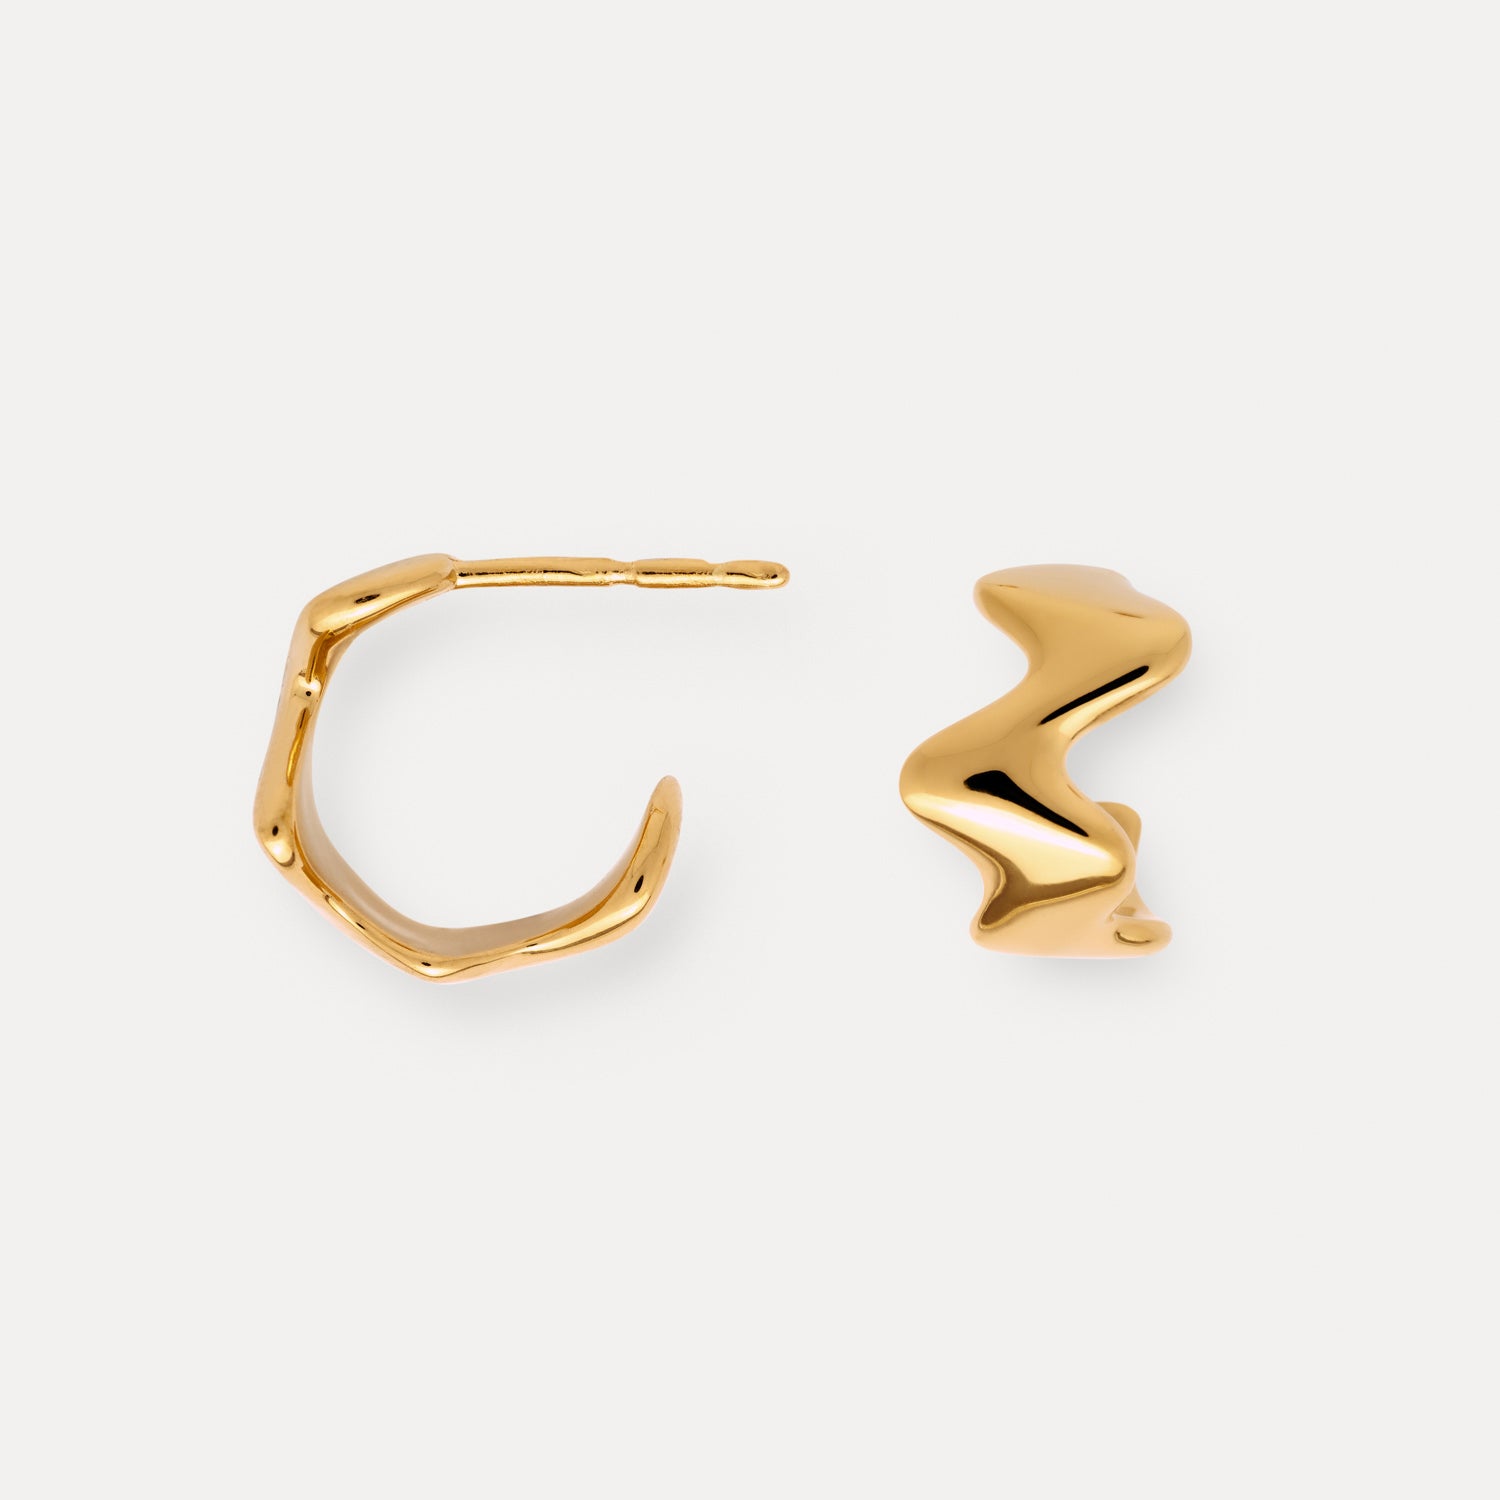 Poise Bold Hoops, recycled 18k Gold Vermeil - VEYIA Berlin. Small, wide, wavy hoops.